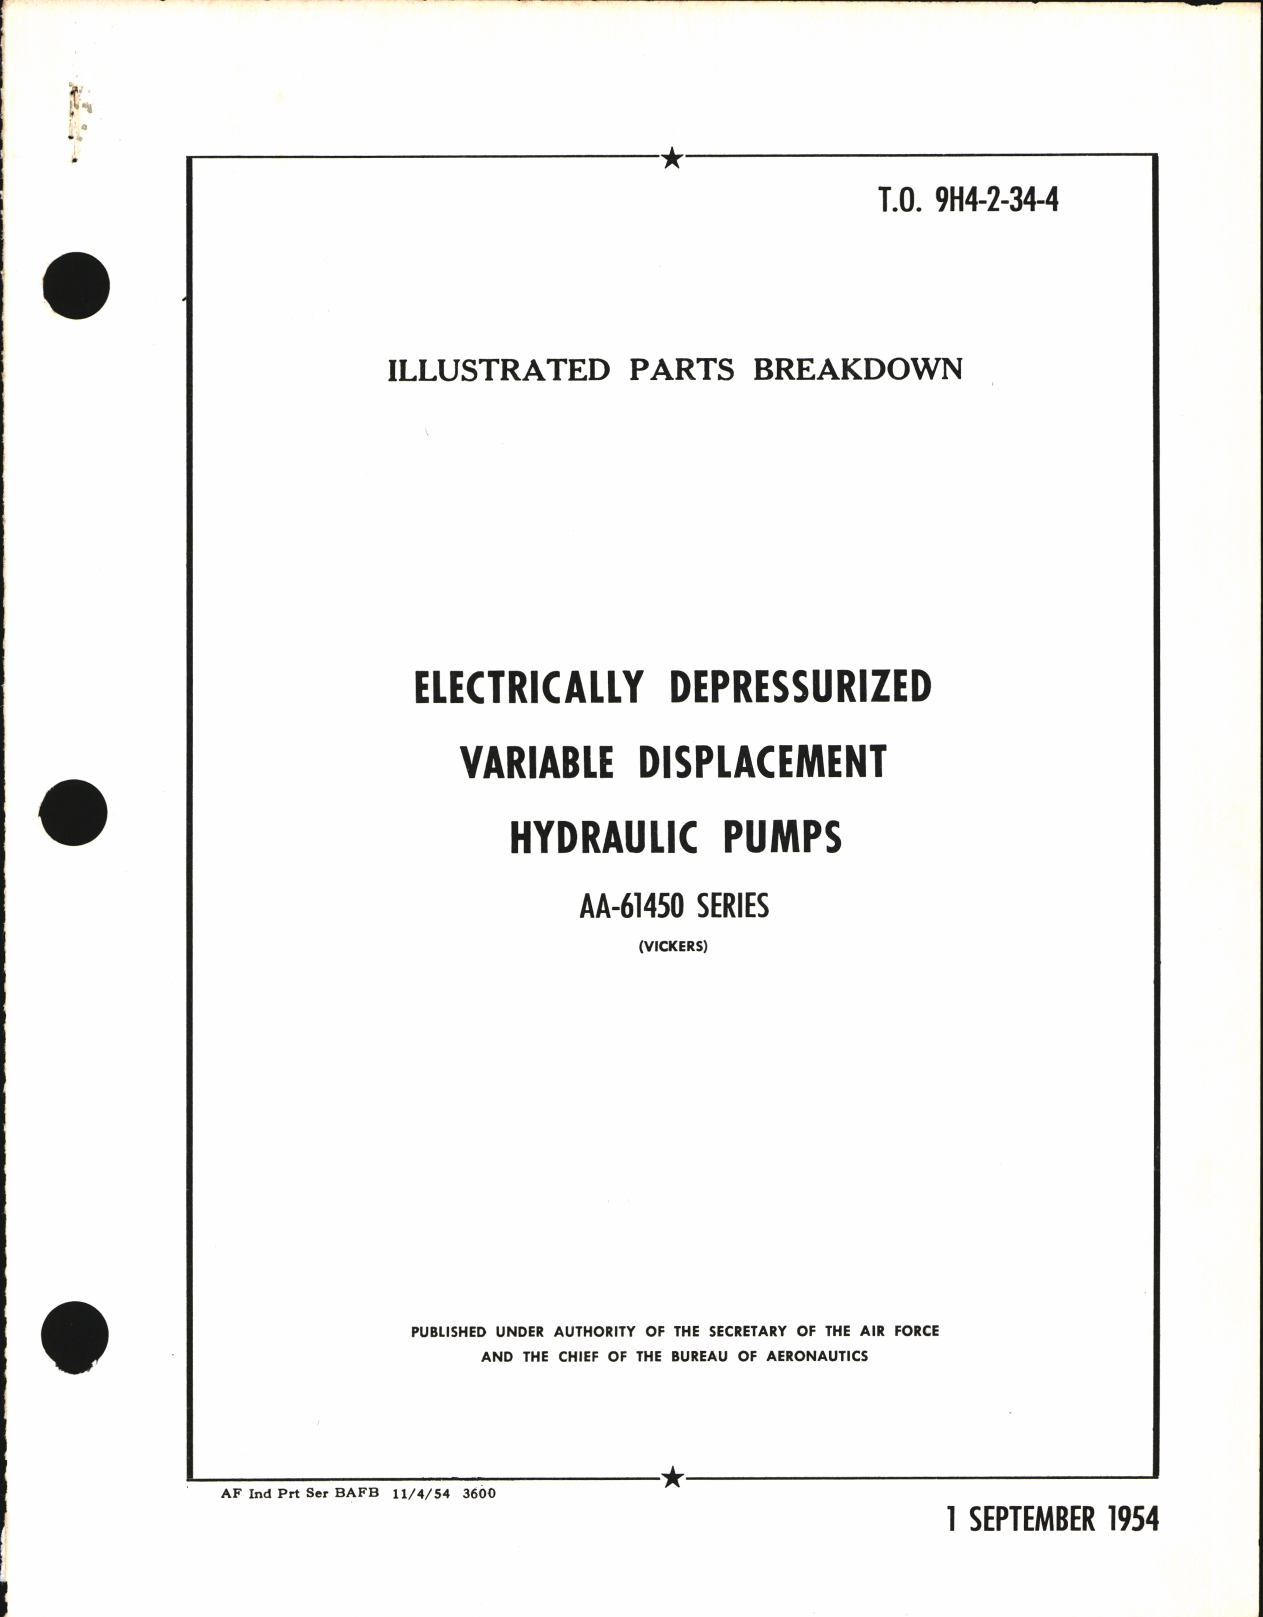 Sample page 1 from AirCorps Library document: Illustrated Parts Breakdown for Electrically Depressurized Variable Displacement Hydraulic Pumps AA-61250 Series